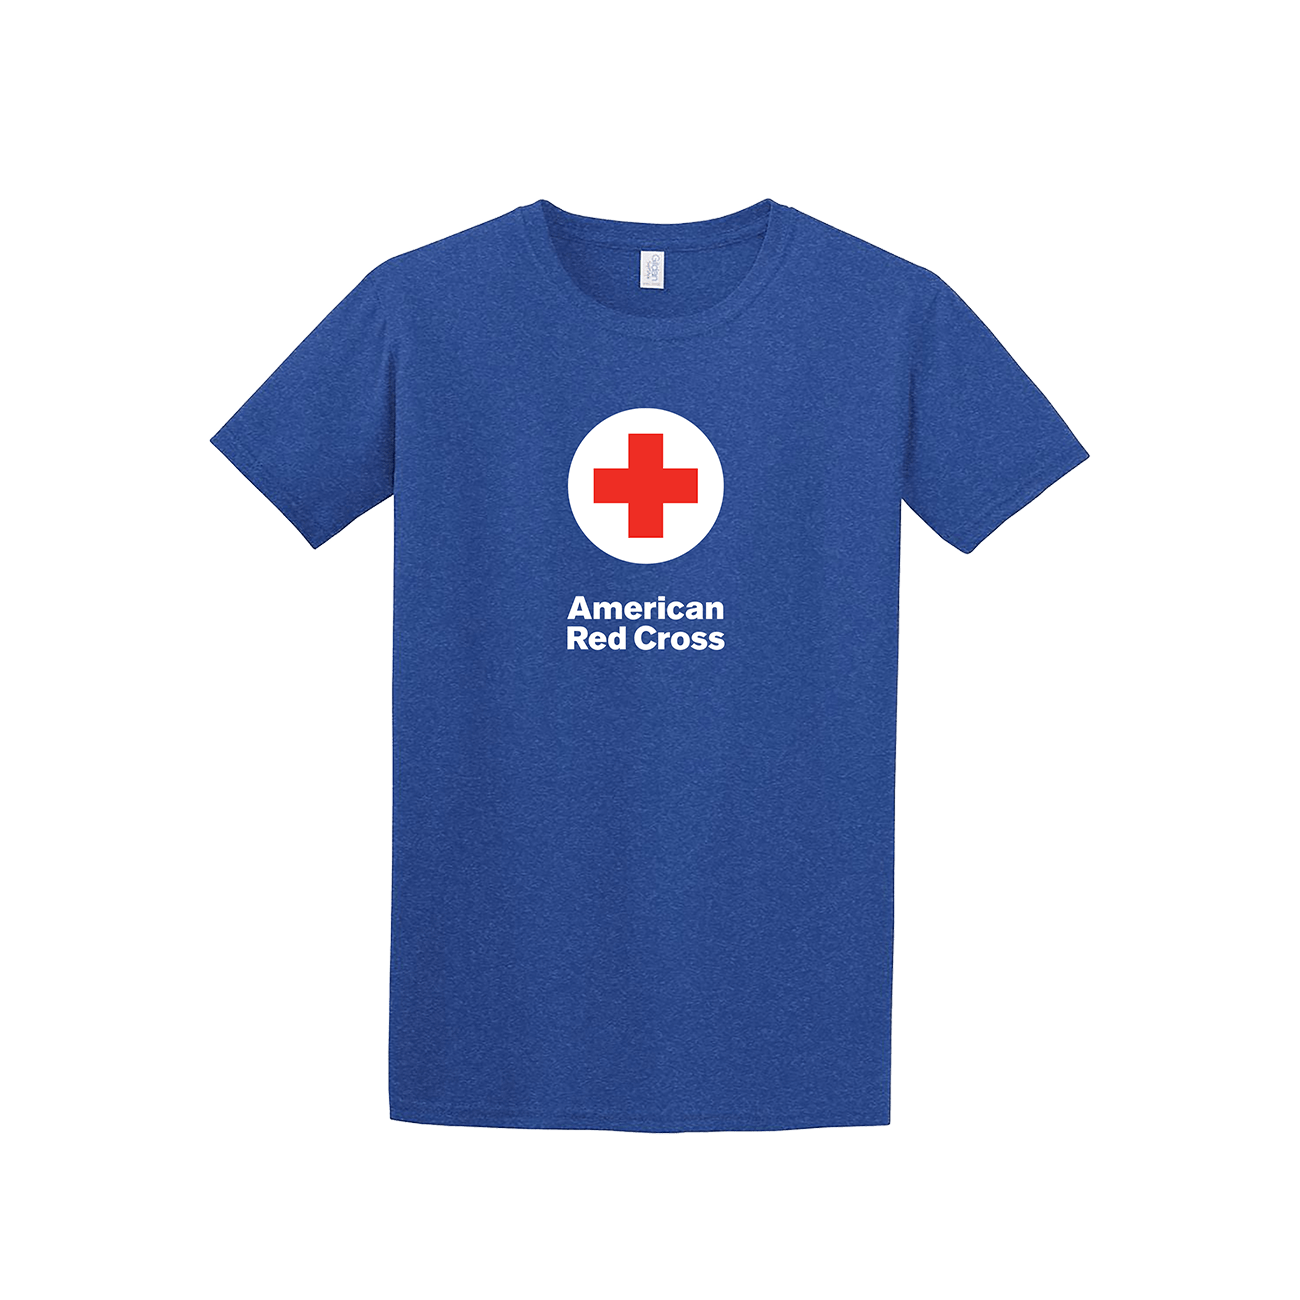 Blue and Red Cross Logo - Unisex 100% Cotton T Shirt With ARC Logo. Red Cross Store